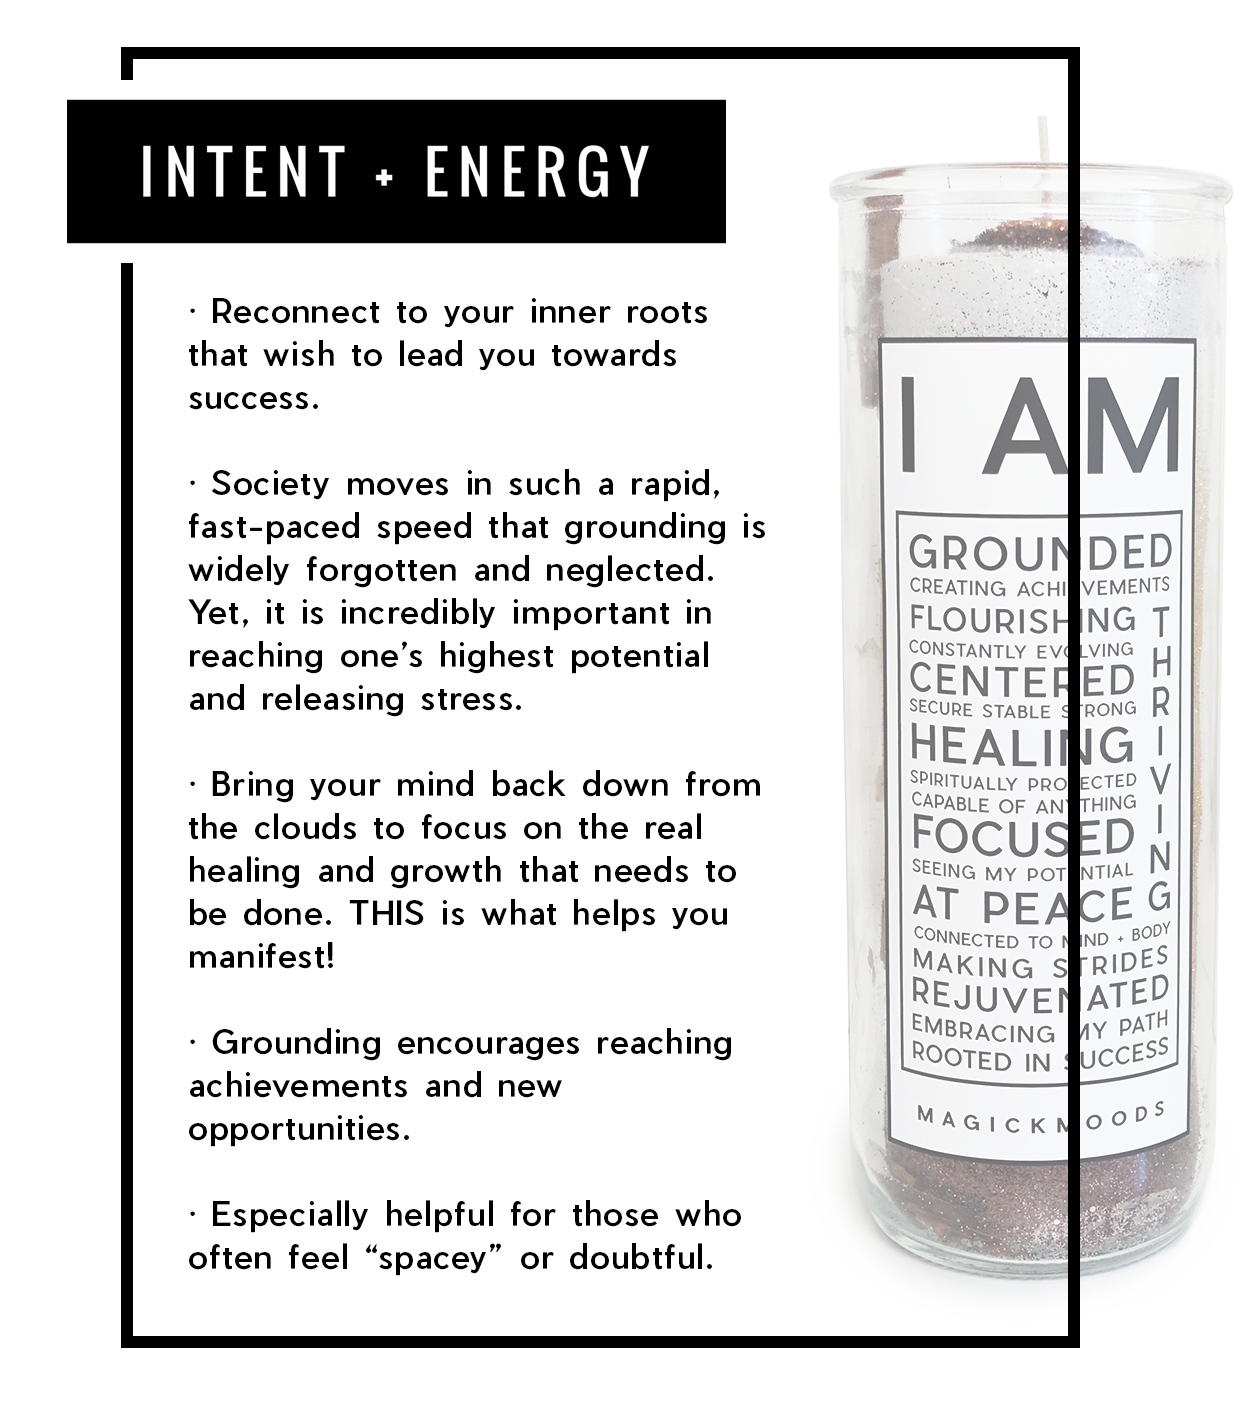 I Am Grounded 7-Day Meditation Candle - PREORDER - Ships by July 28th, 2023